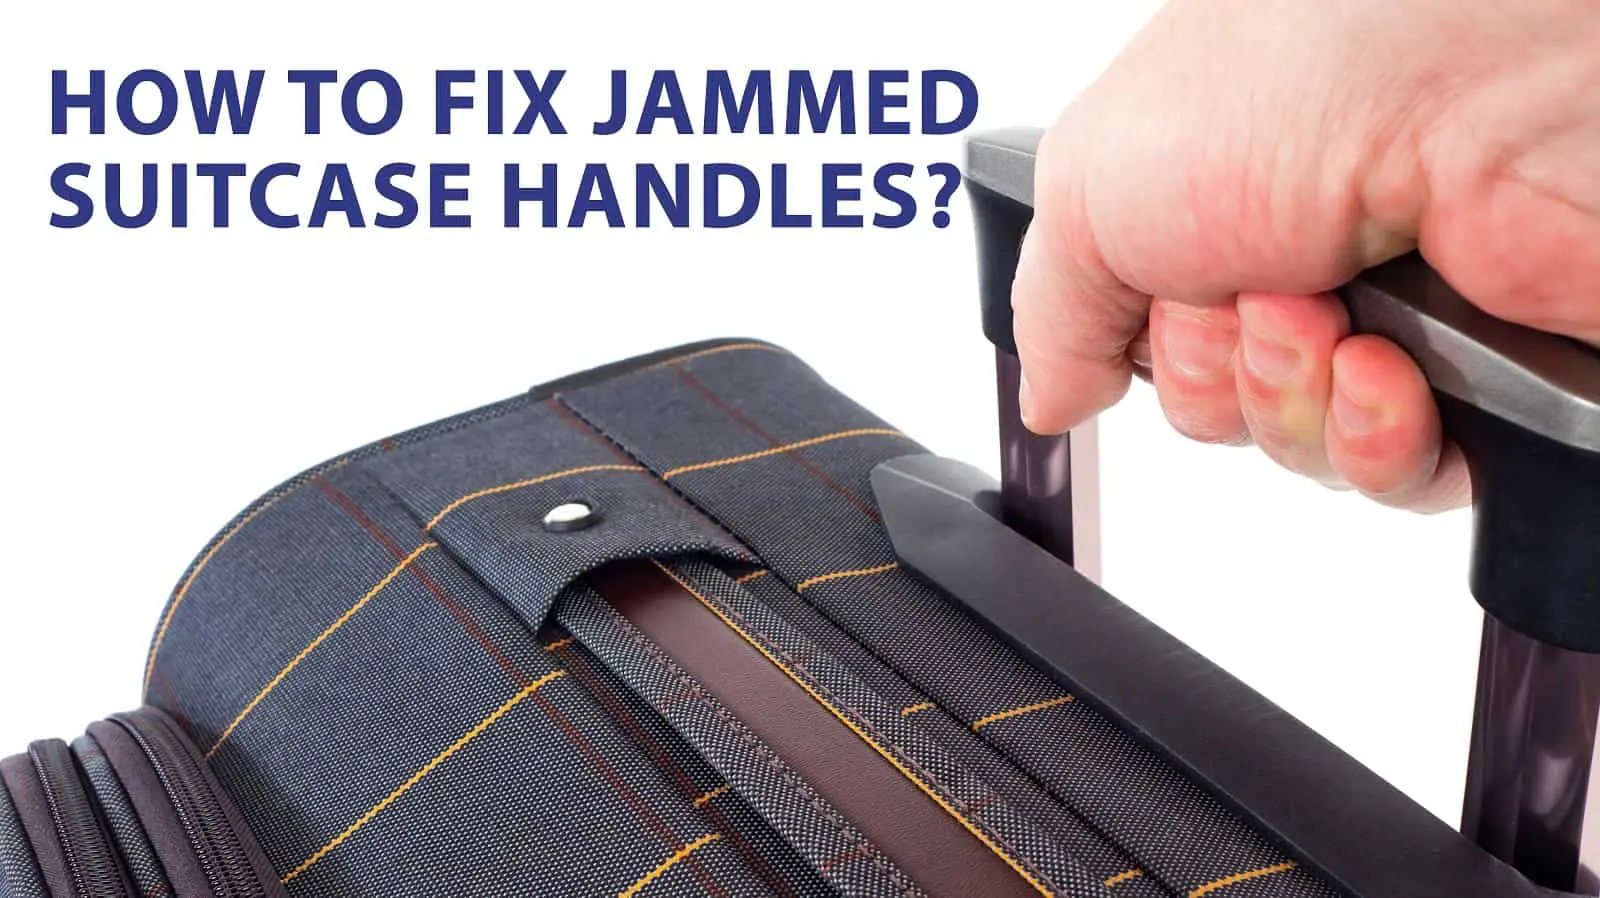 How to Repair Common Suitcase Issues